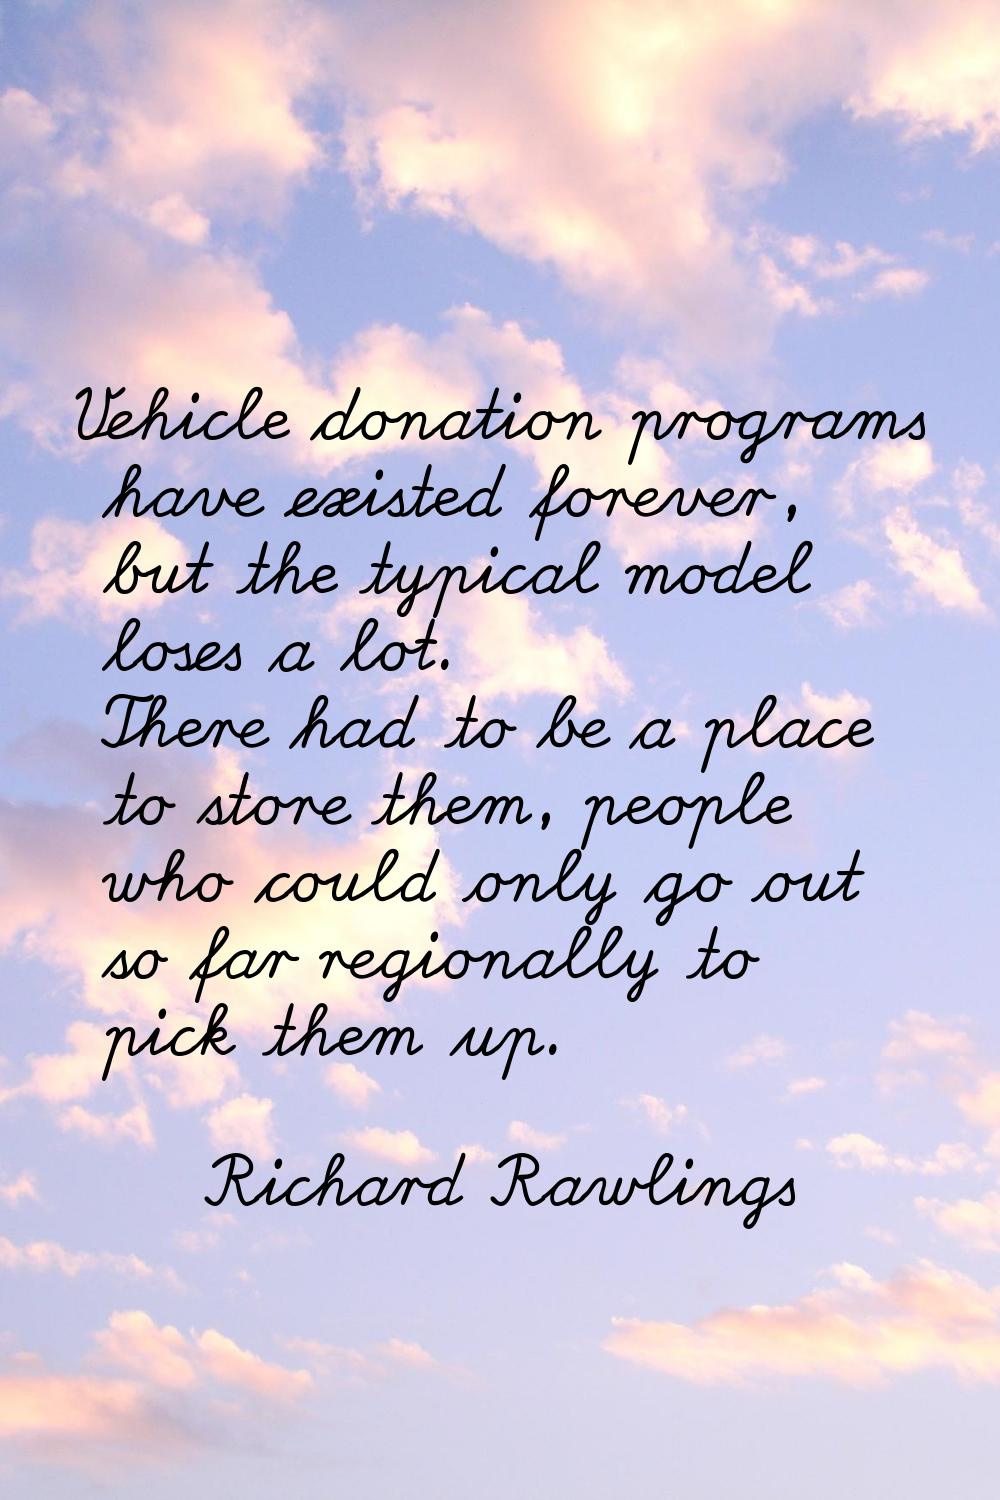 Vehicle donation programs have existed forever, but the typical model loses a lot. There had to be 